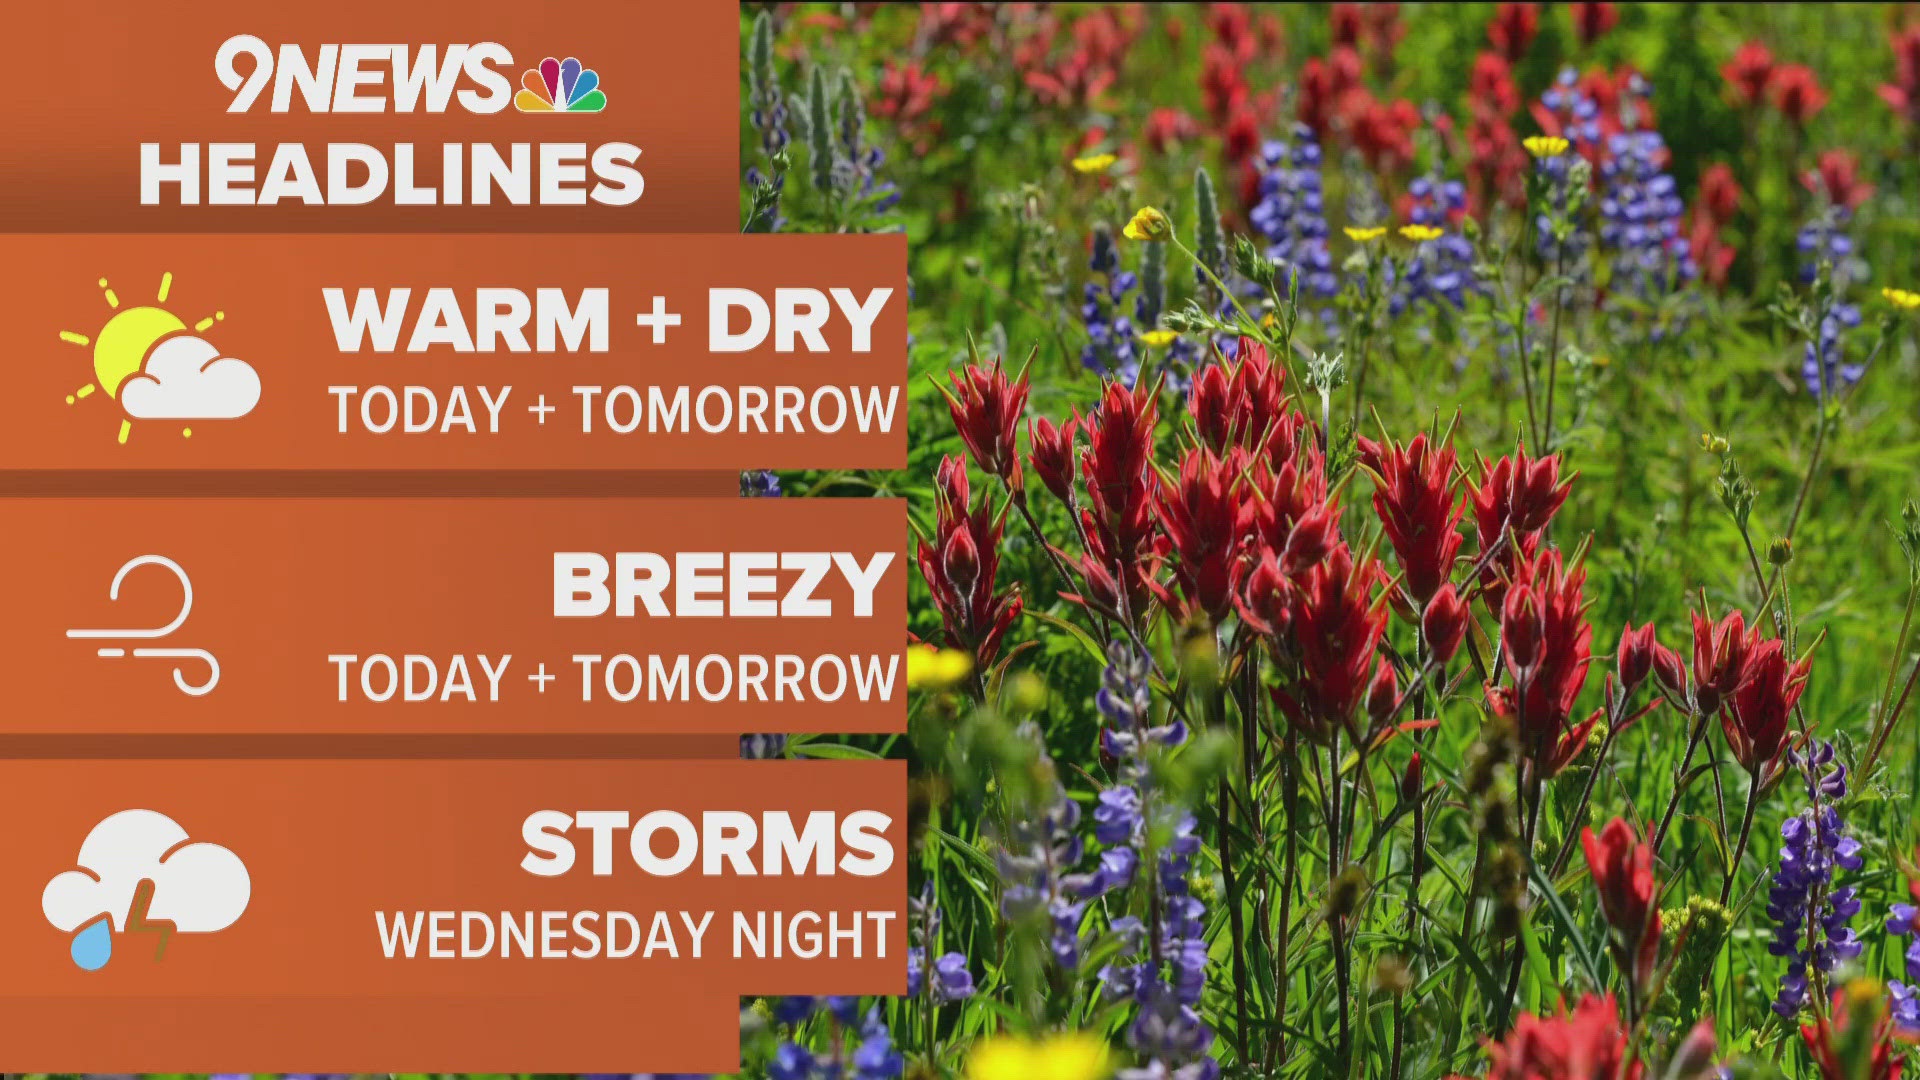 Colorado will stay mild and dry again Tuesday before a chance for storms on Wednesday and a chilly/rainy Thursday.